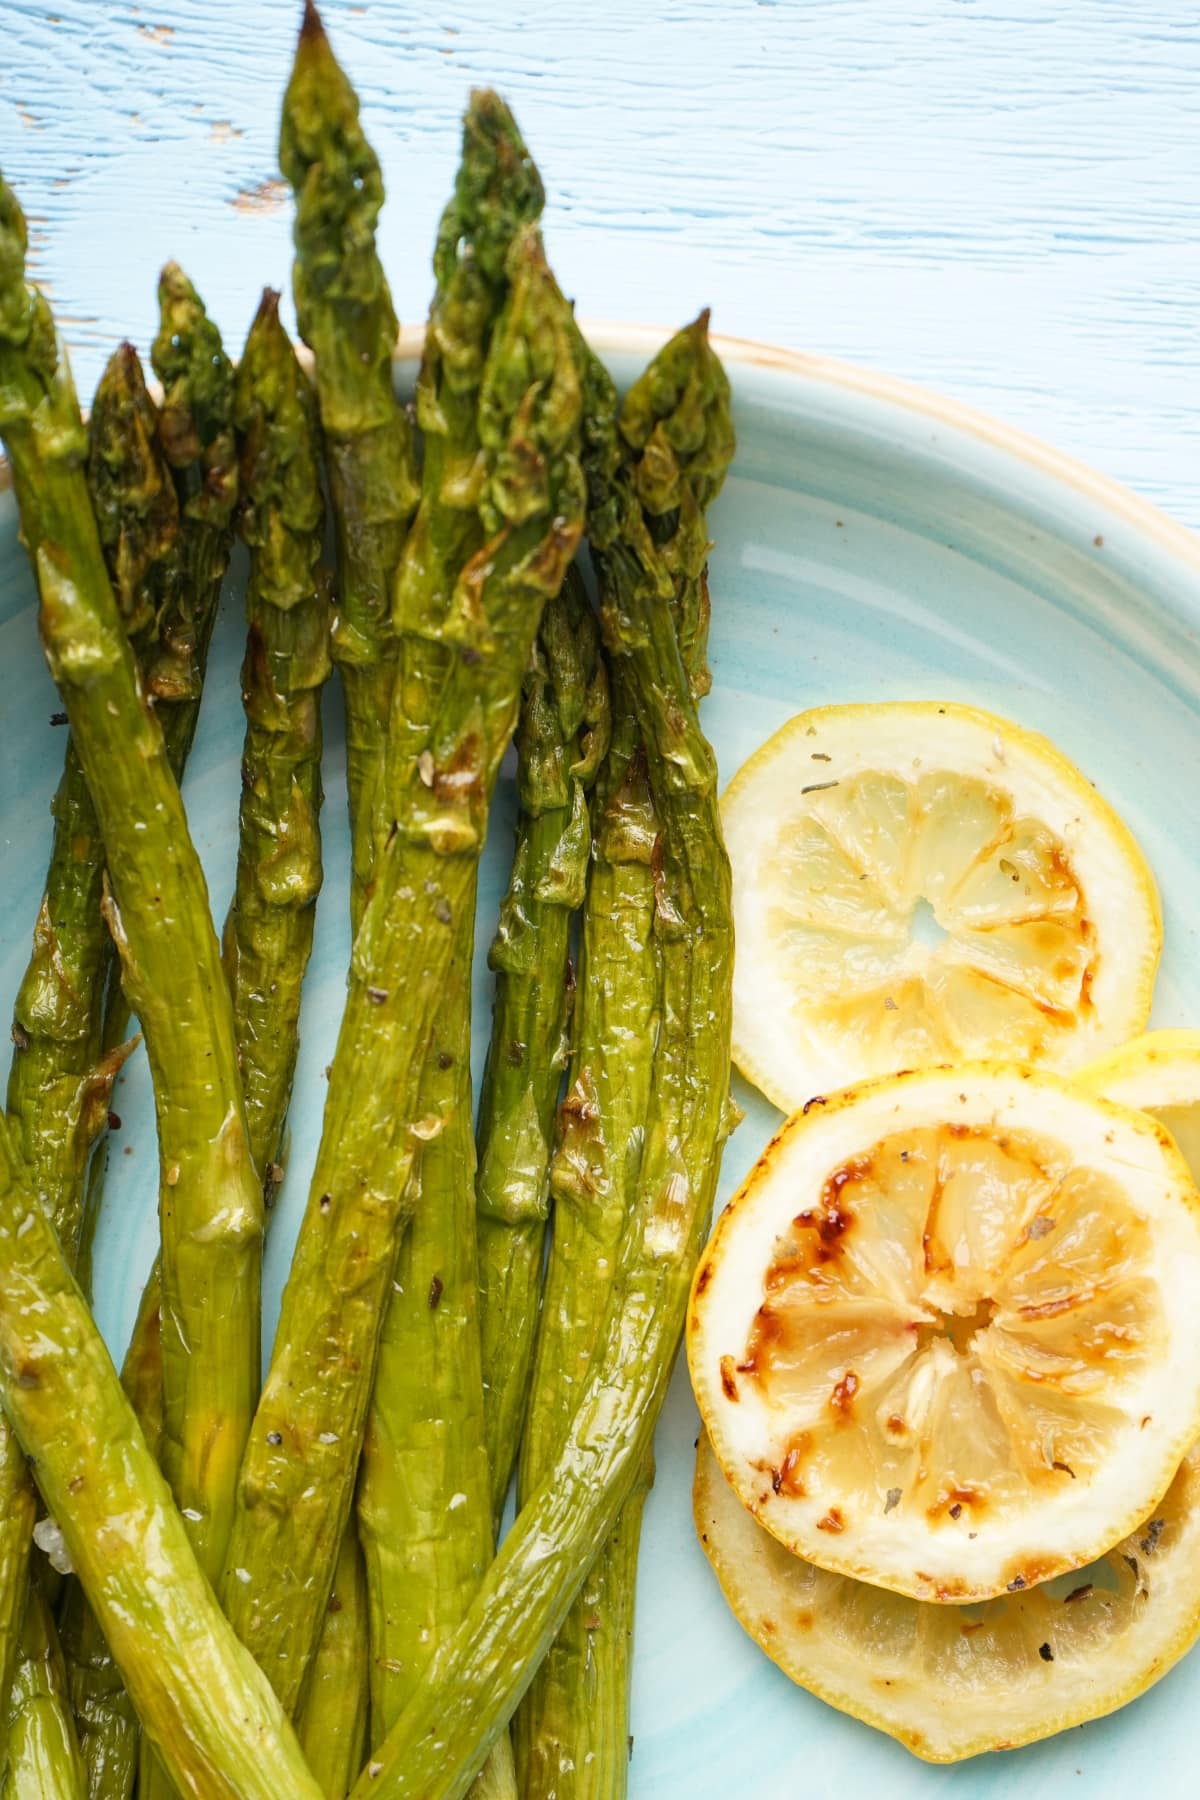 Pieces of roasted asparagus with lemon slices served on a blue plate.